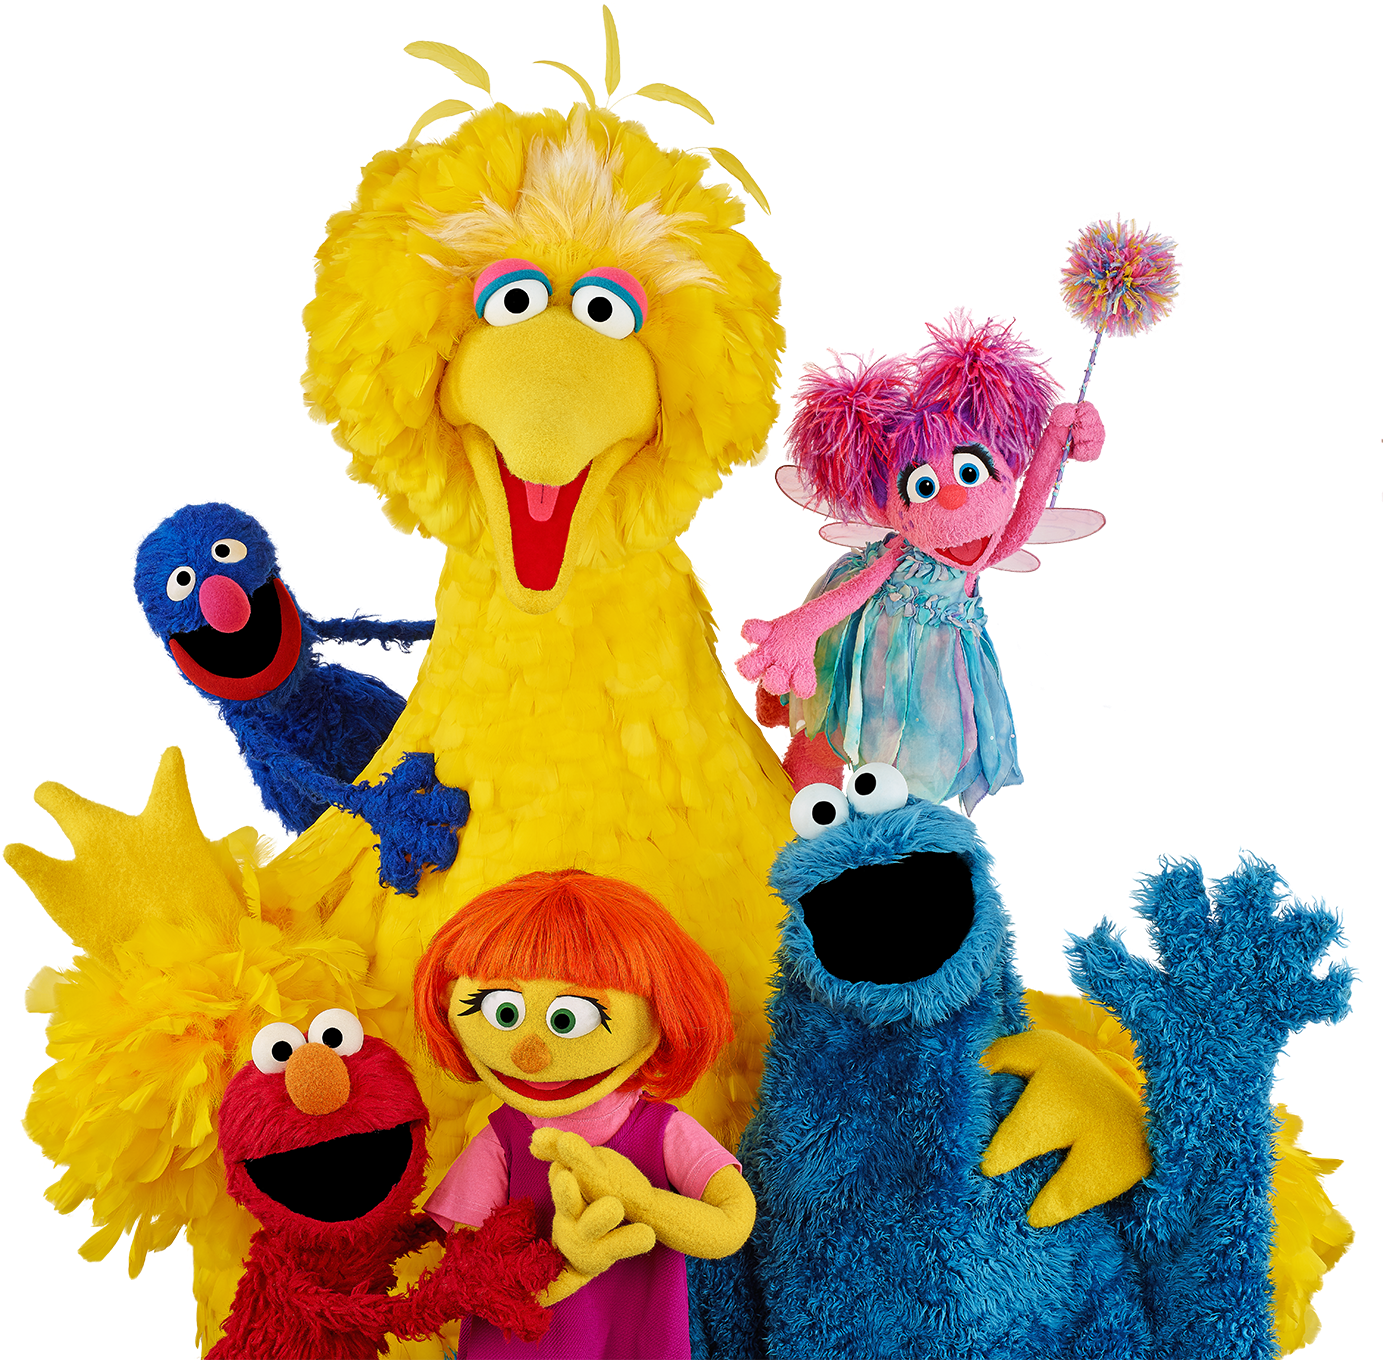 A Group Of Puppets Posing For A Photo